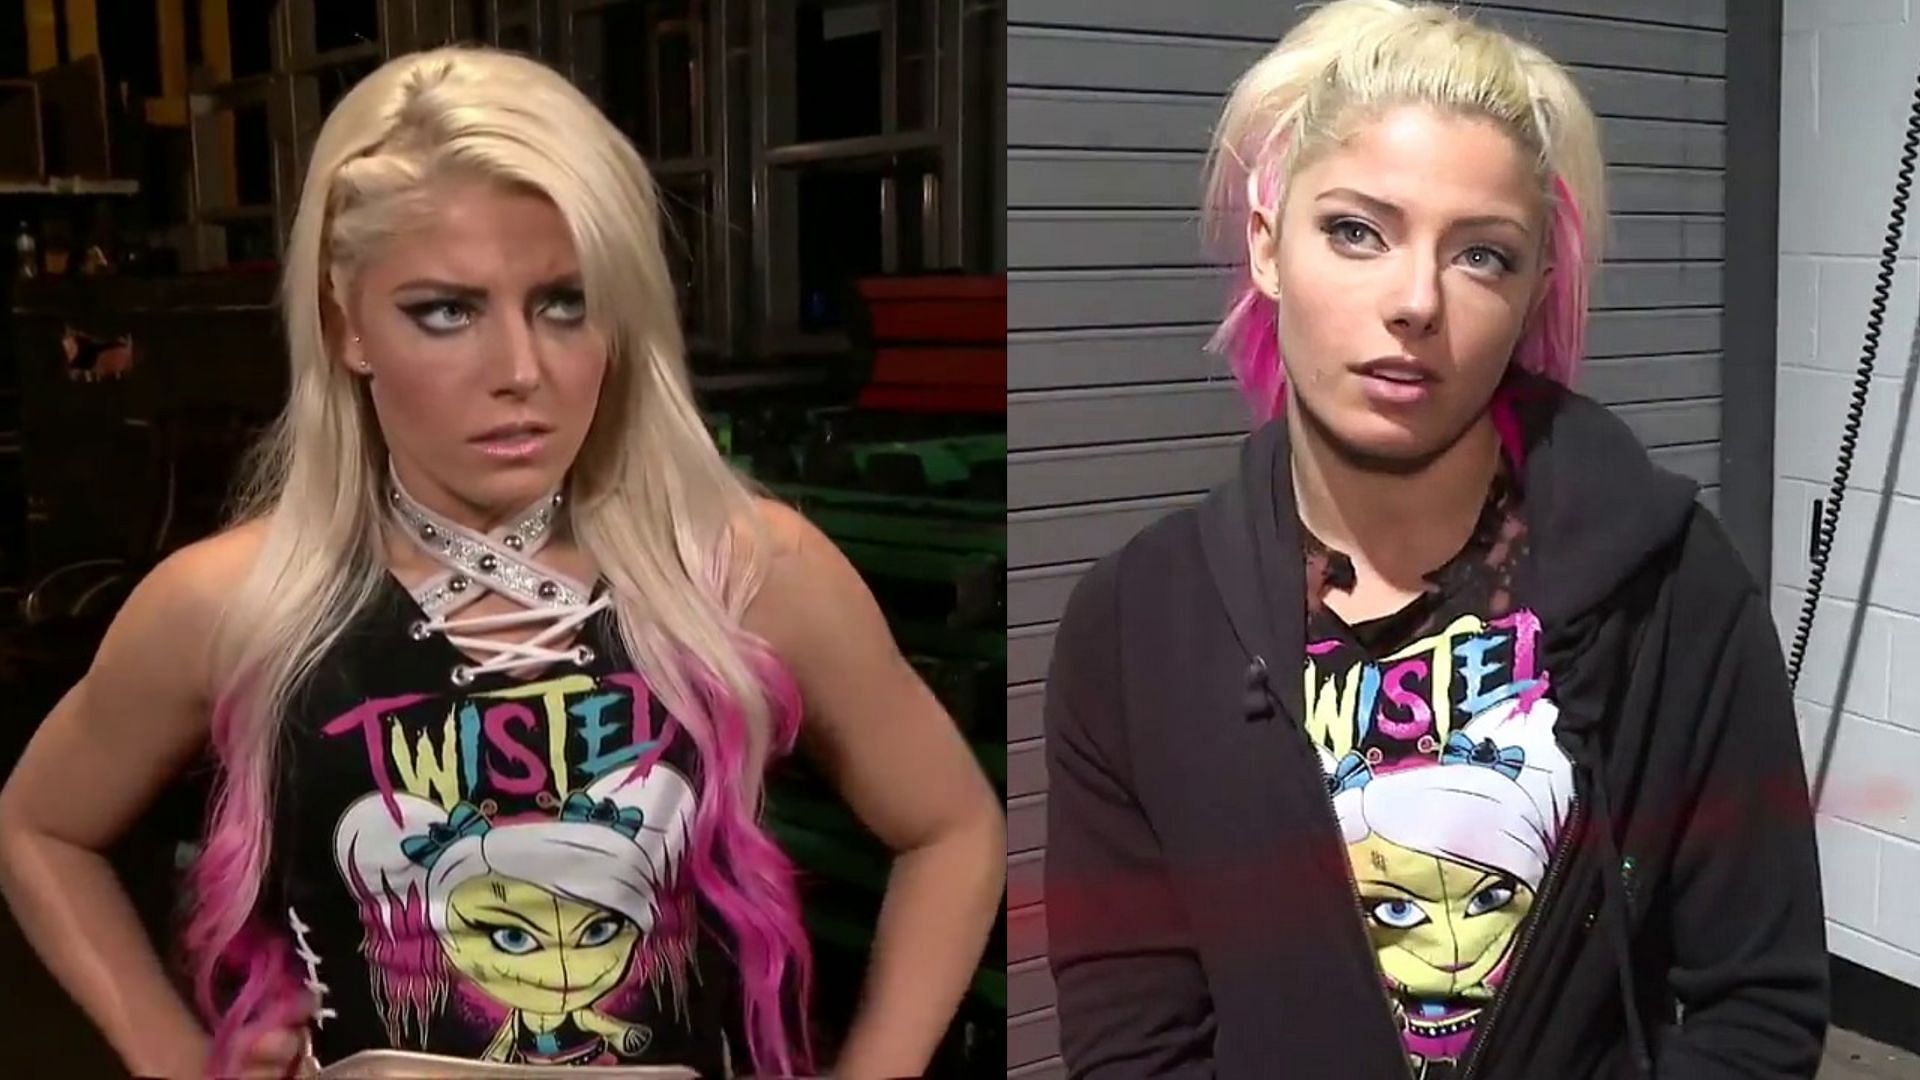 Alexa Bliss has made quite an appearance now